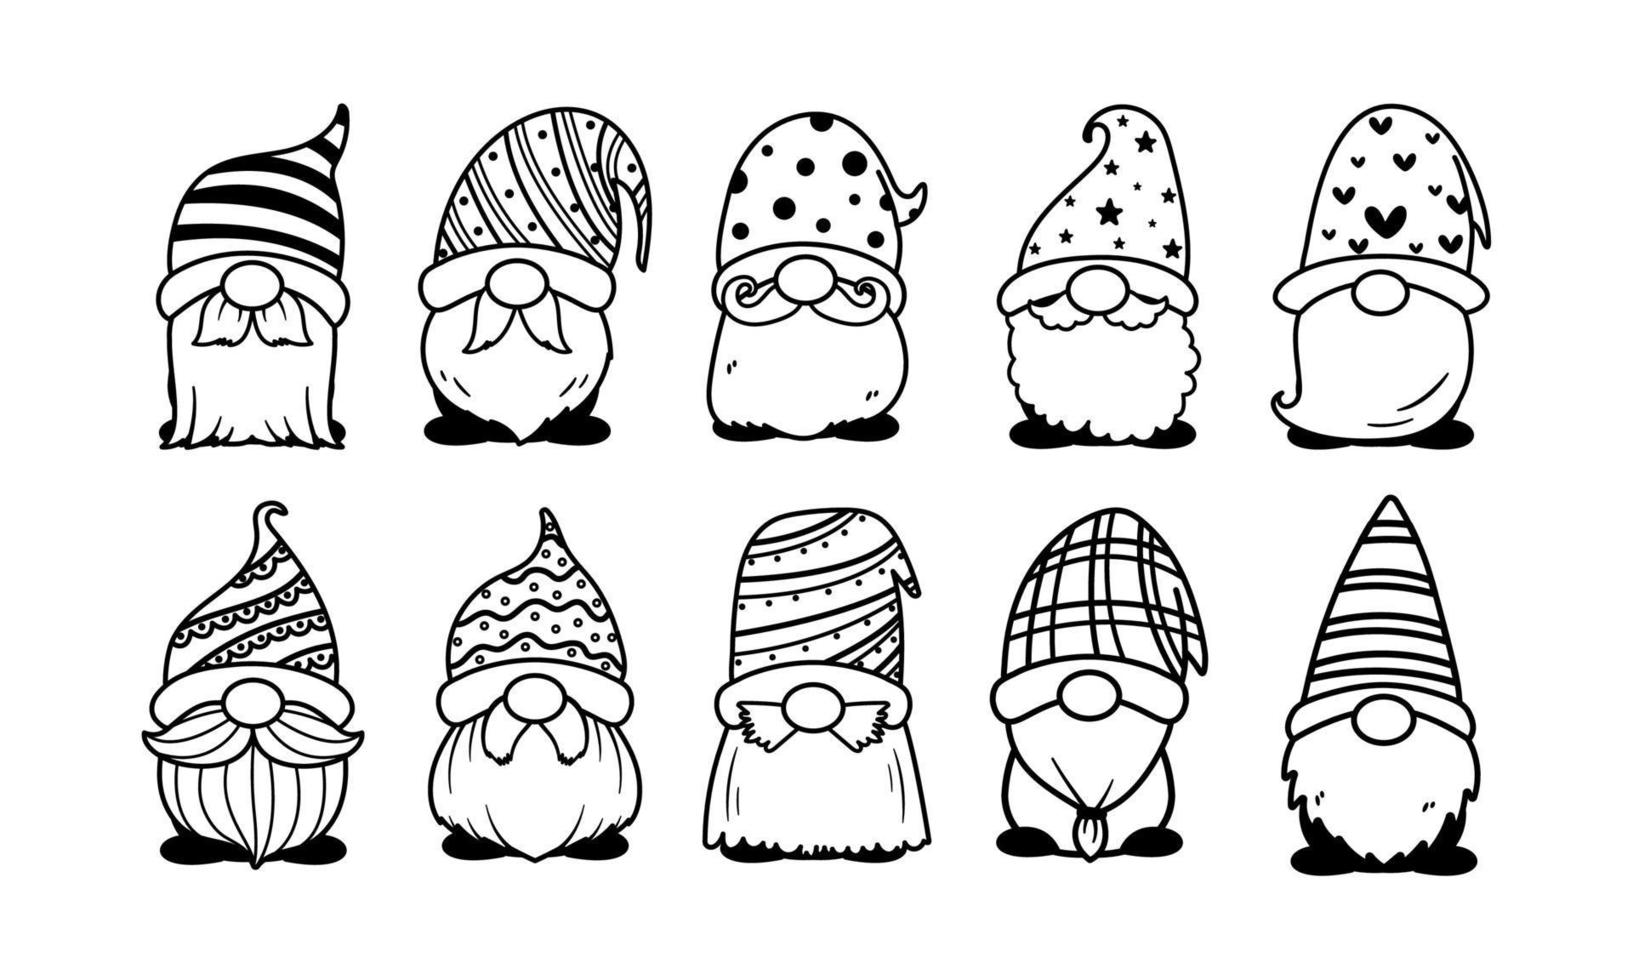 Line art Christmas gnomes design for coloring book isolated on a white background vector